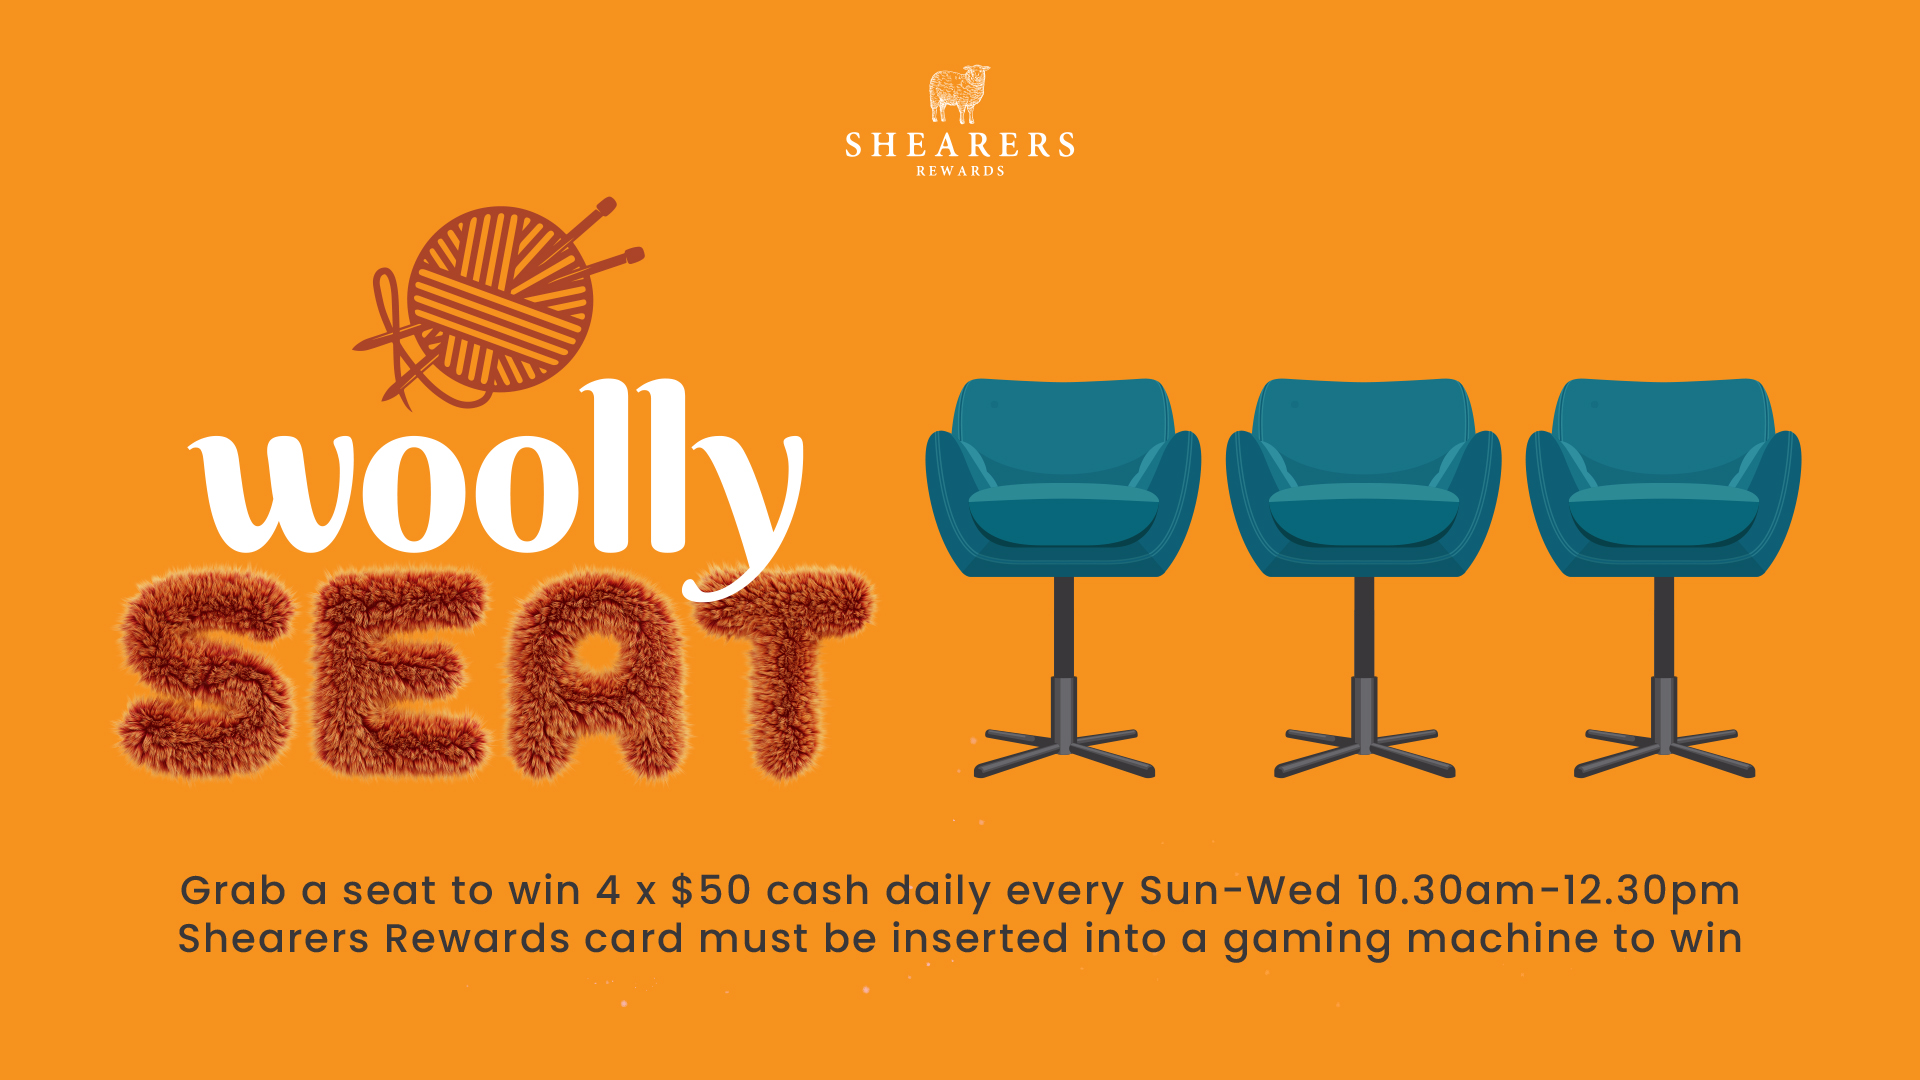 Woolly Seat Gaming Promotion Sun-Wed Shearers Arms Tavern